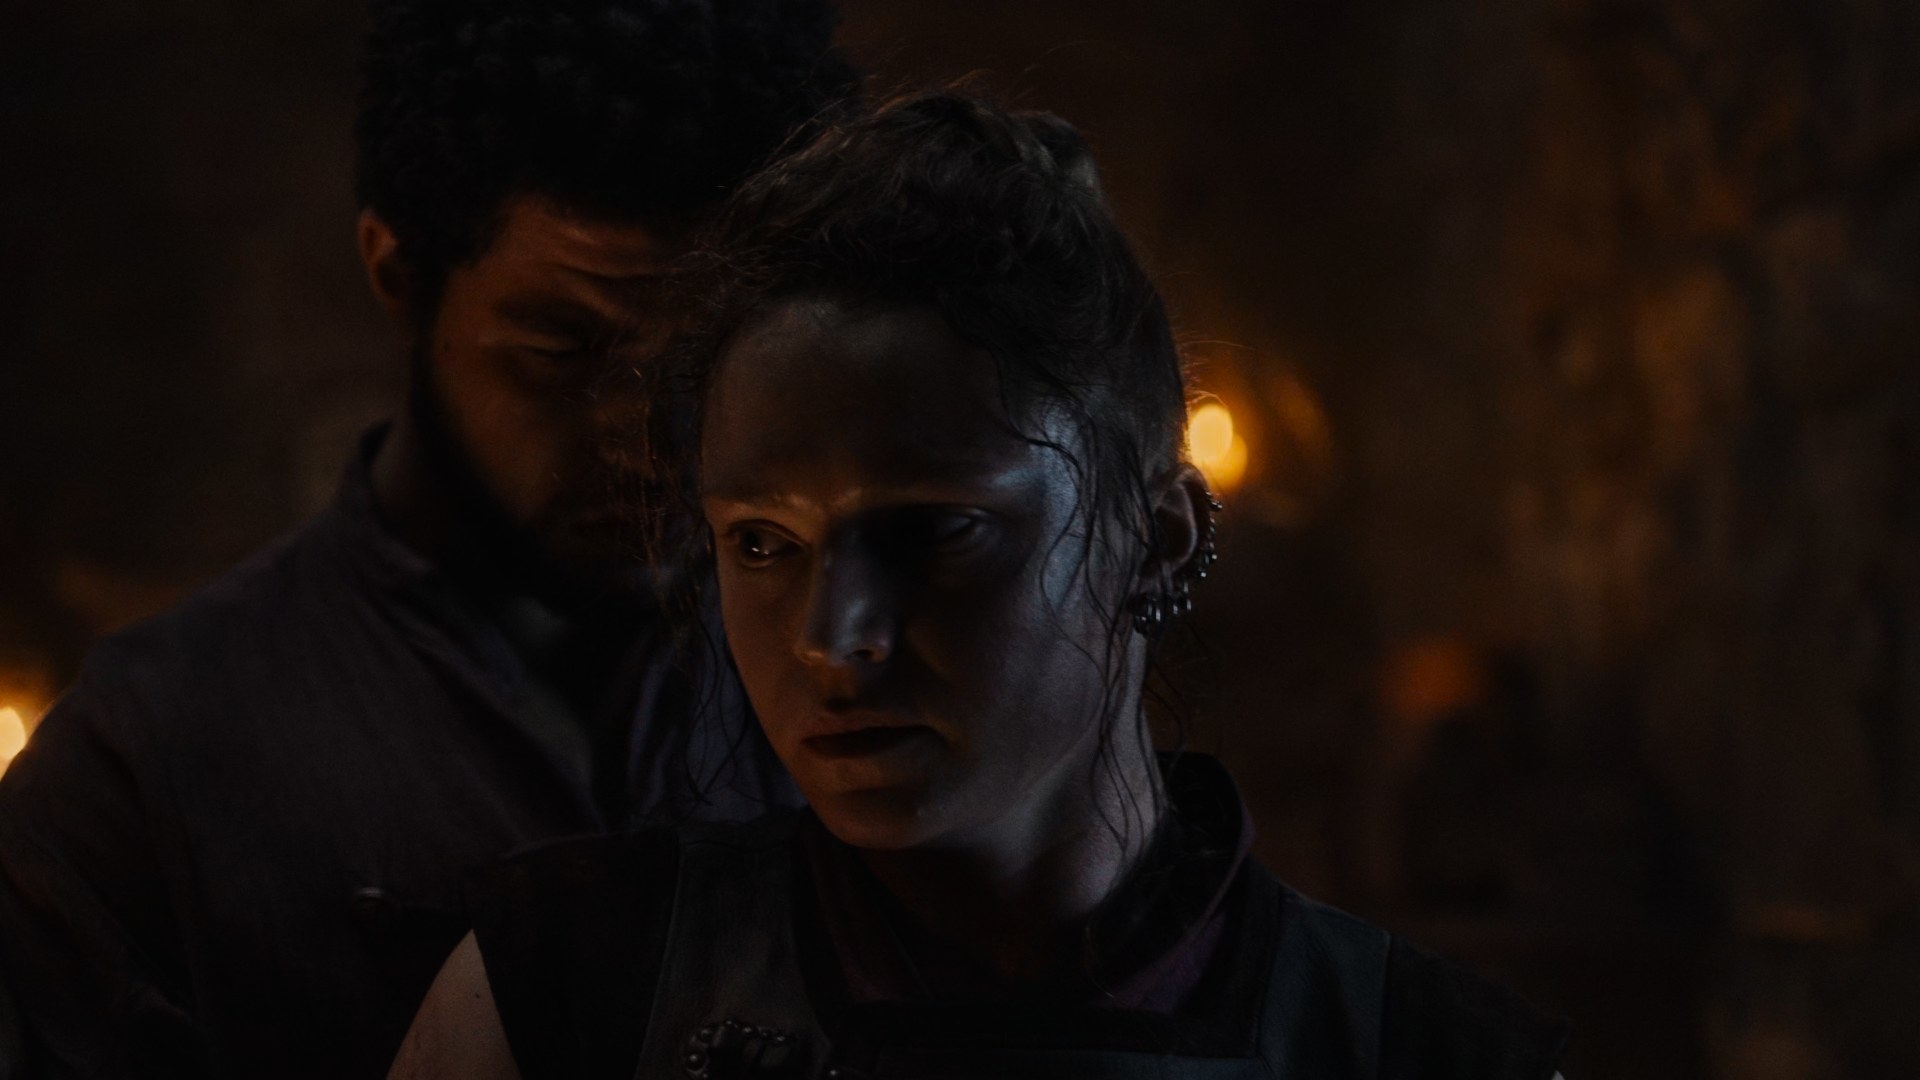 A close-up shot on Laila (Helena Westerman) and Perrin Aybara’s (Marcus Rutherford) faces in the forge – Laila, hair plastered to her head, has been working the forge and looks distracted. Perrin is resting his forehead against her head